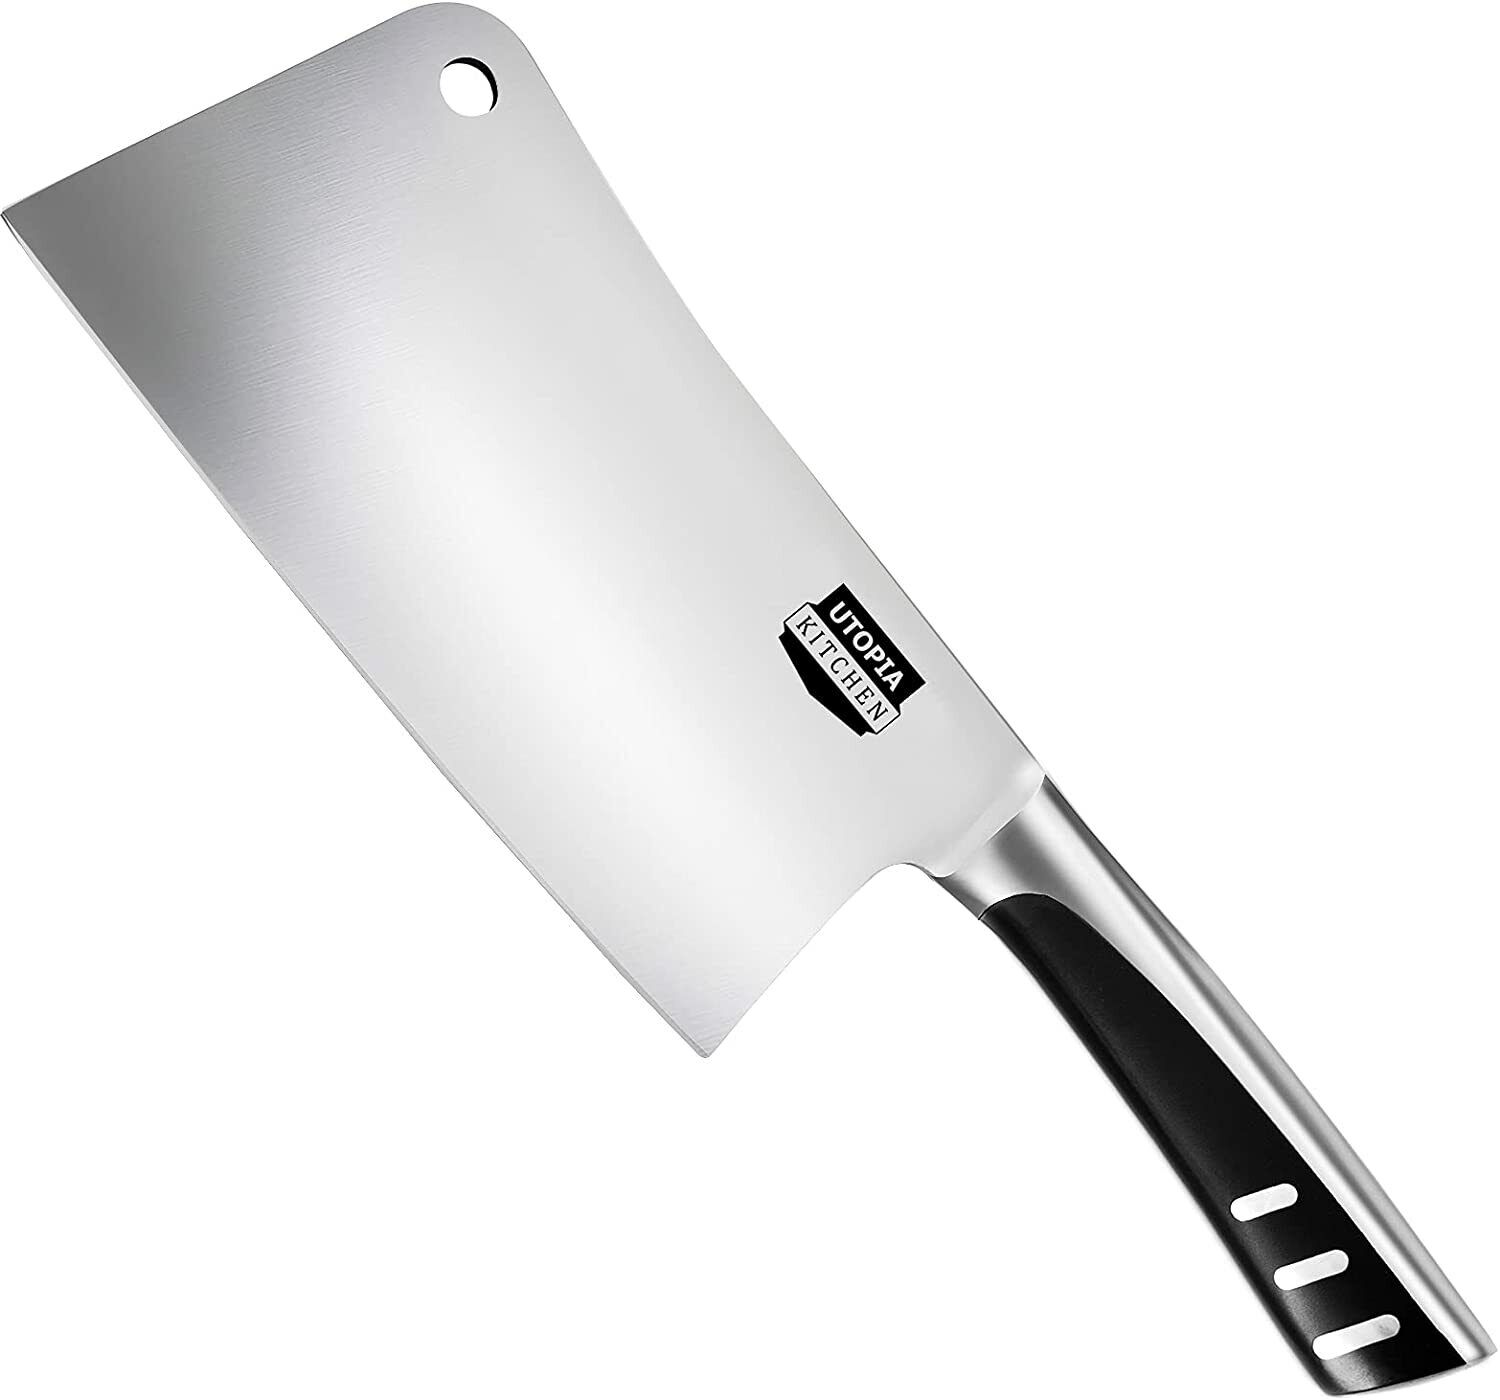 Cleaver Knife Chopper Butcher Stainless Steel in Multiple size Utopia Kitchen